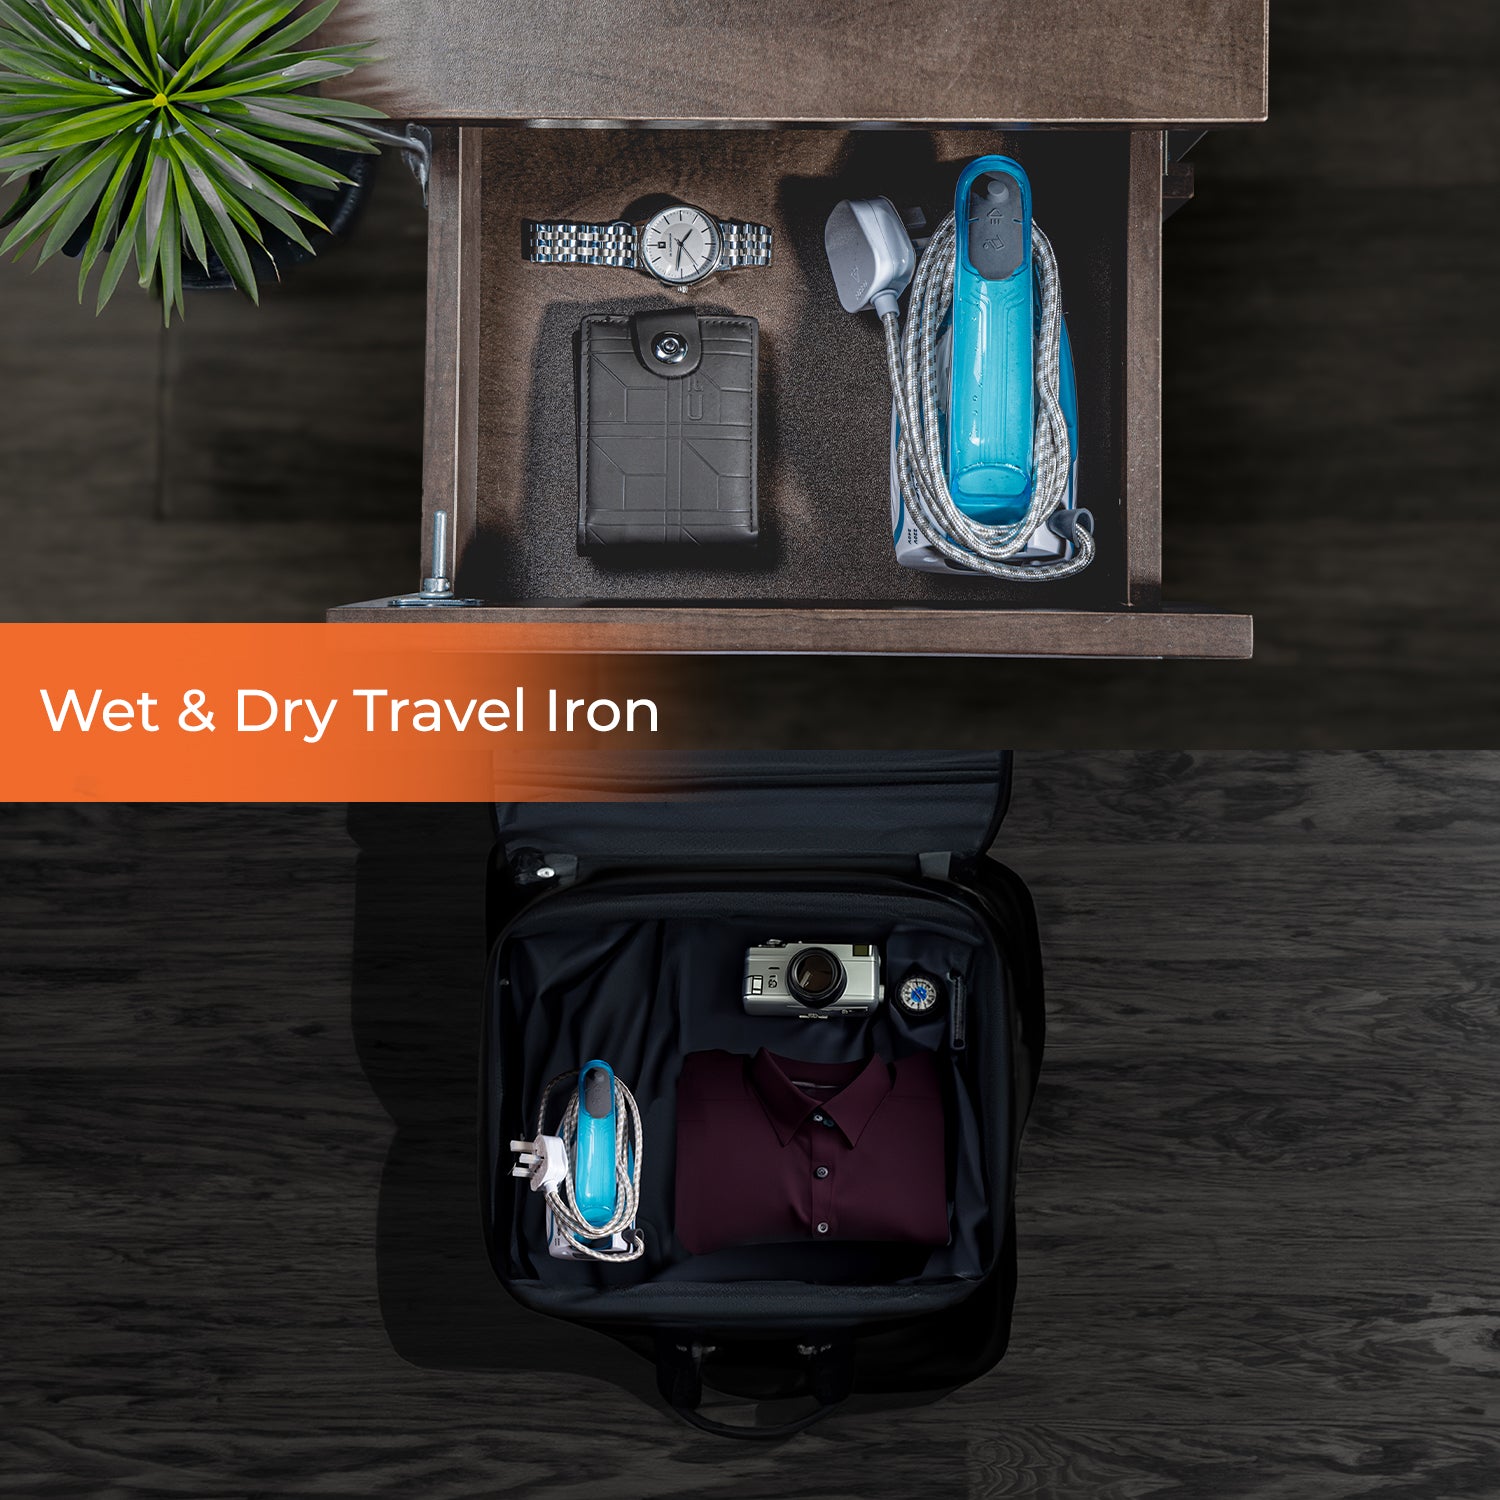 Geepas Wet and Dry Travel Iron